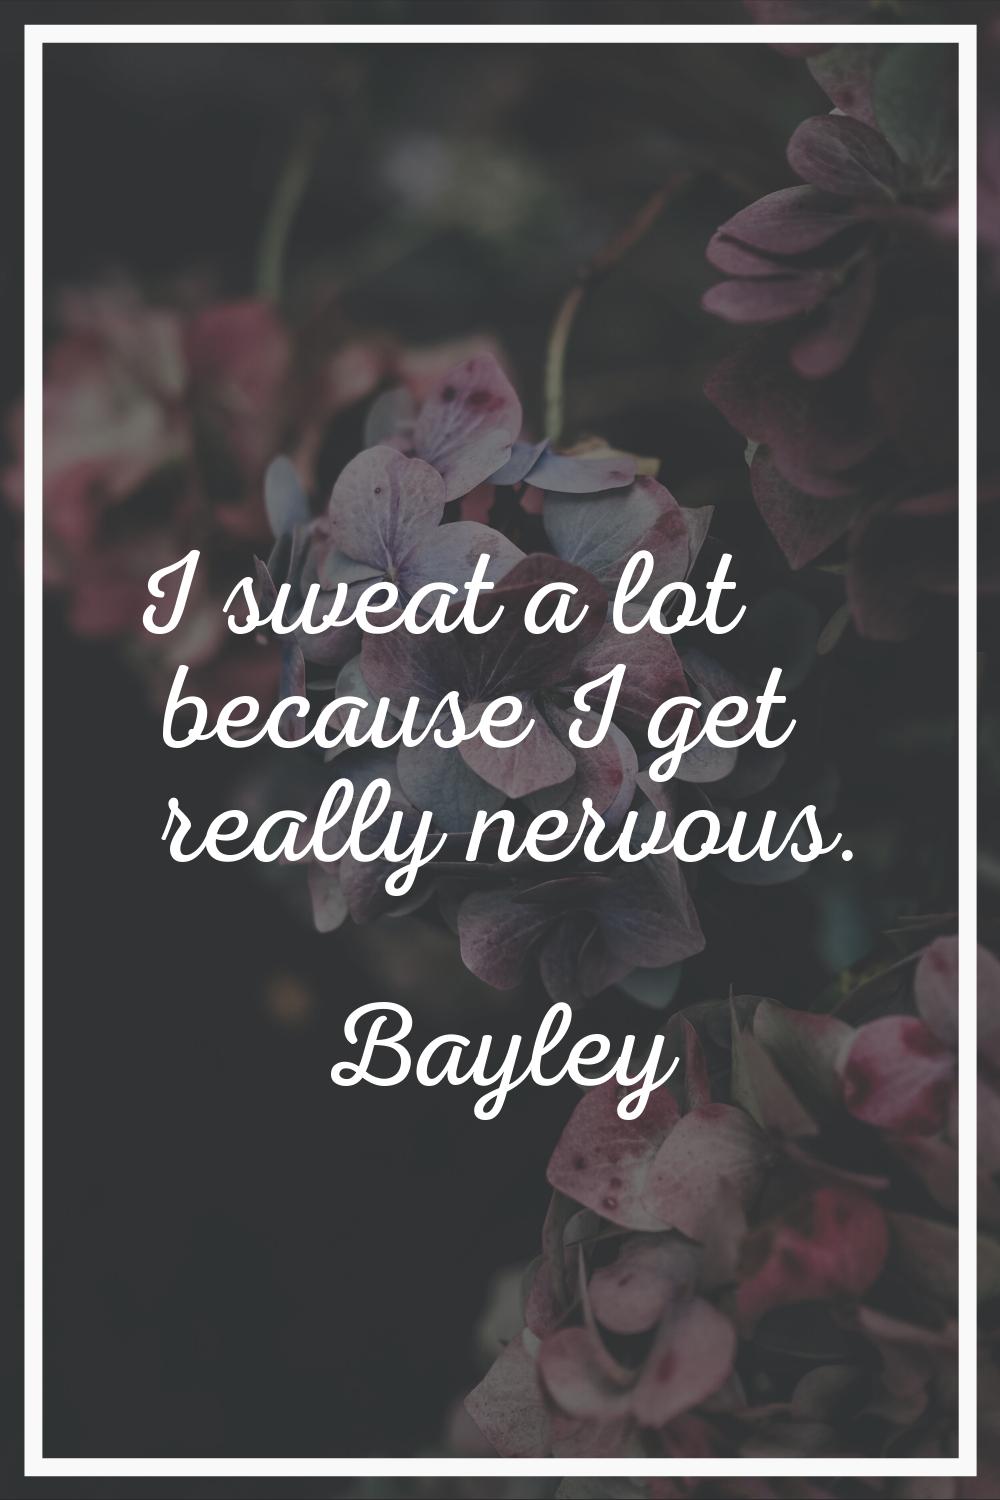 I sweat a lot because I get really nervous.